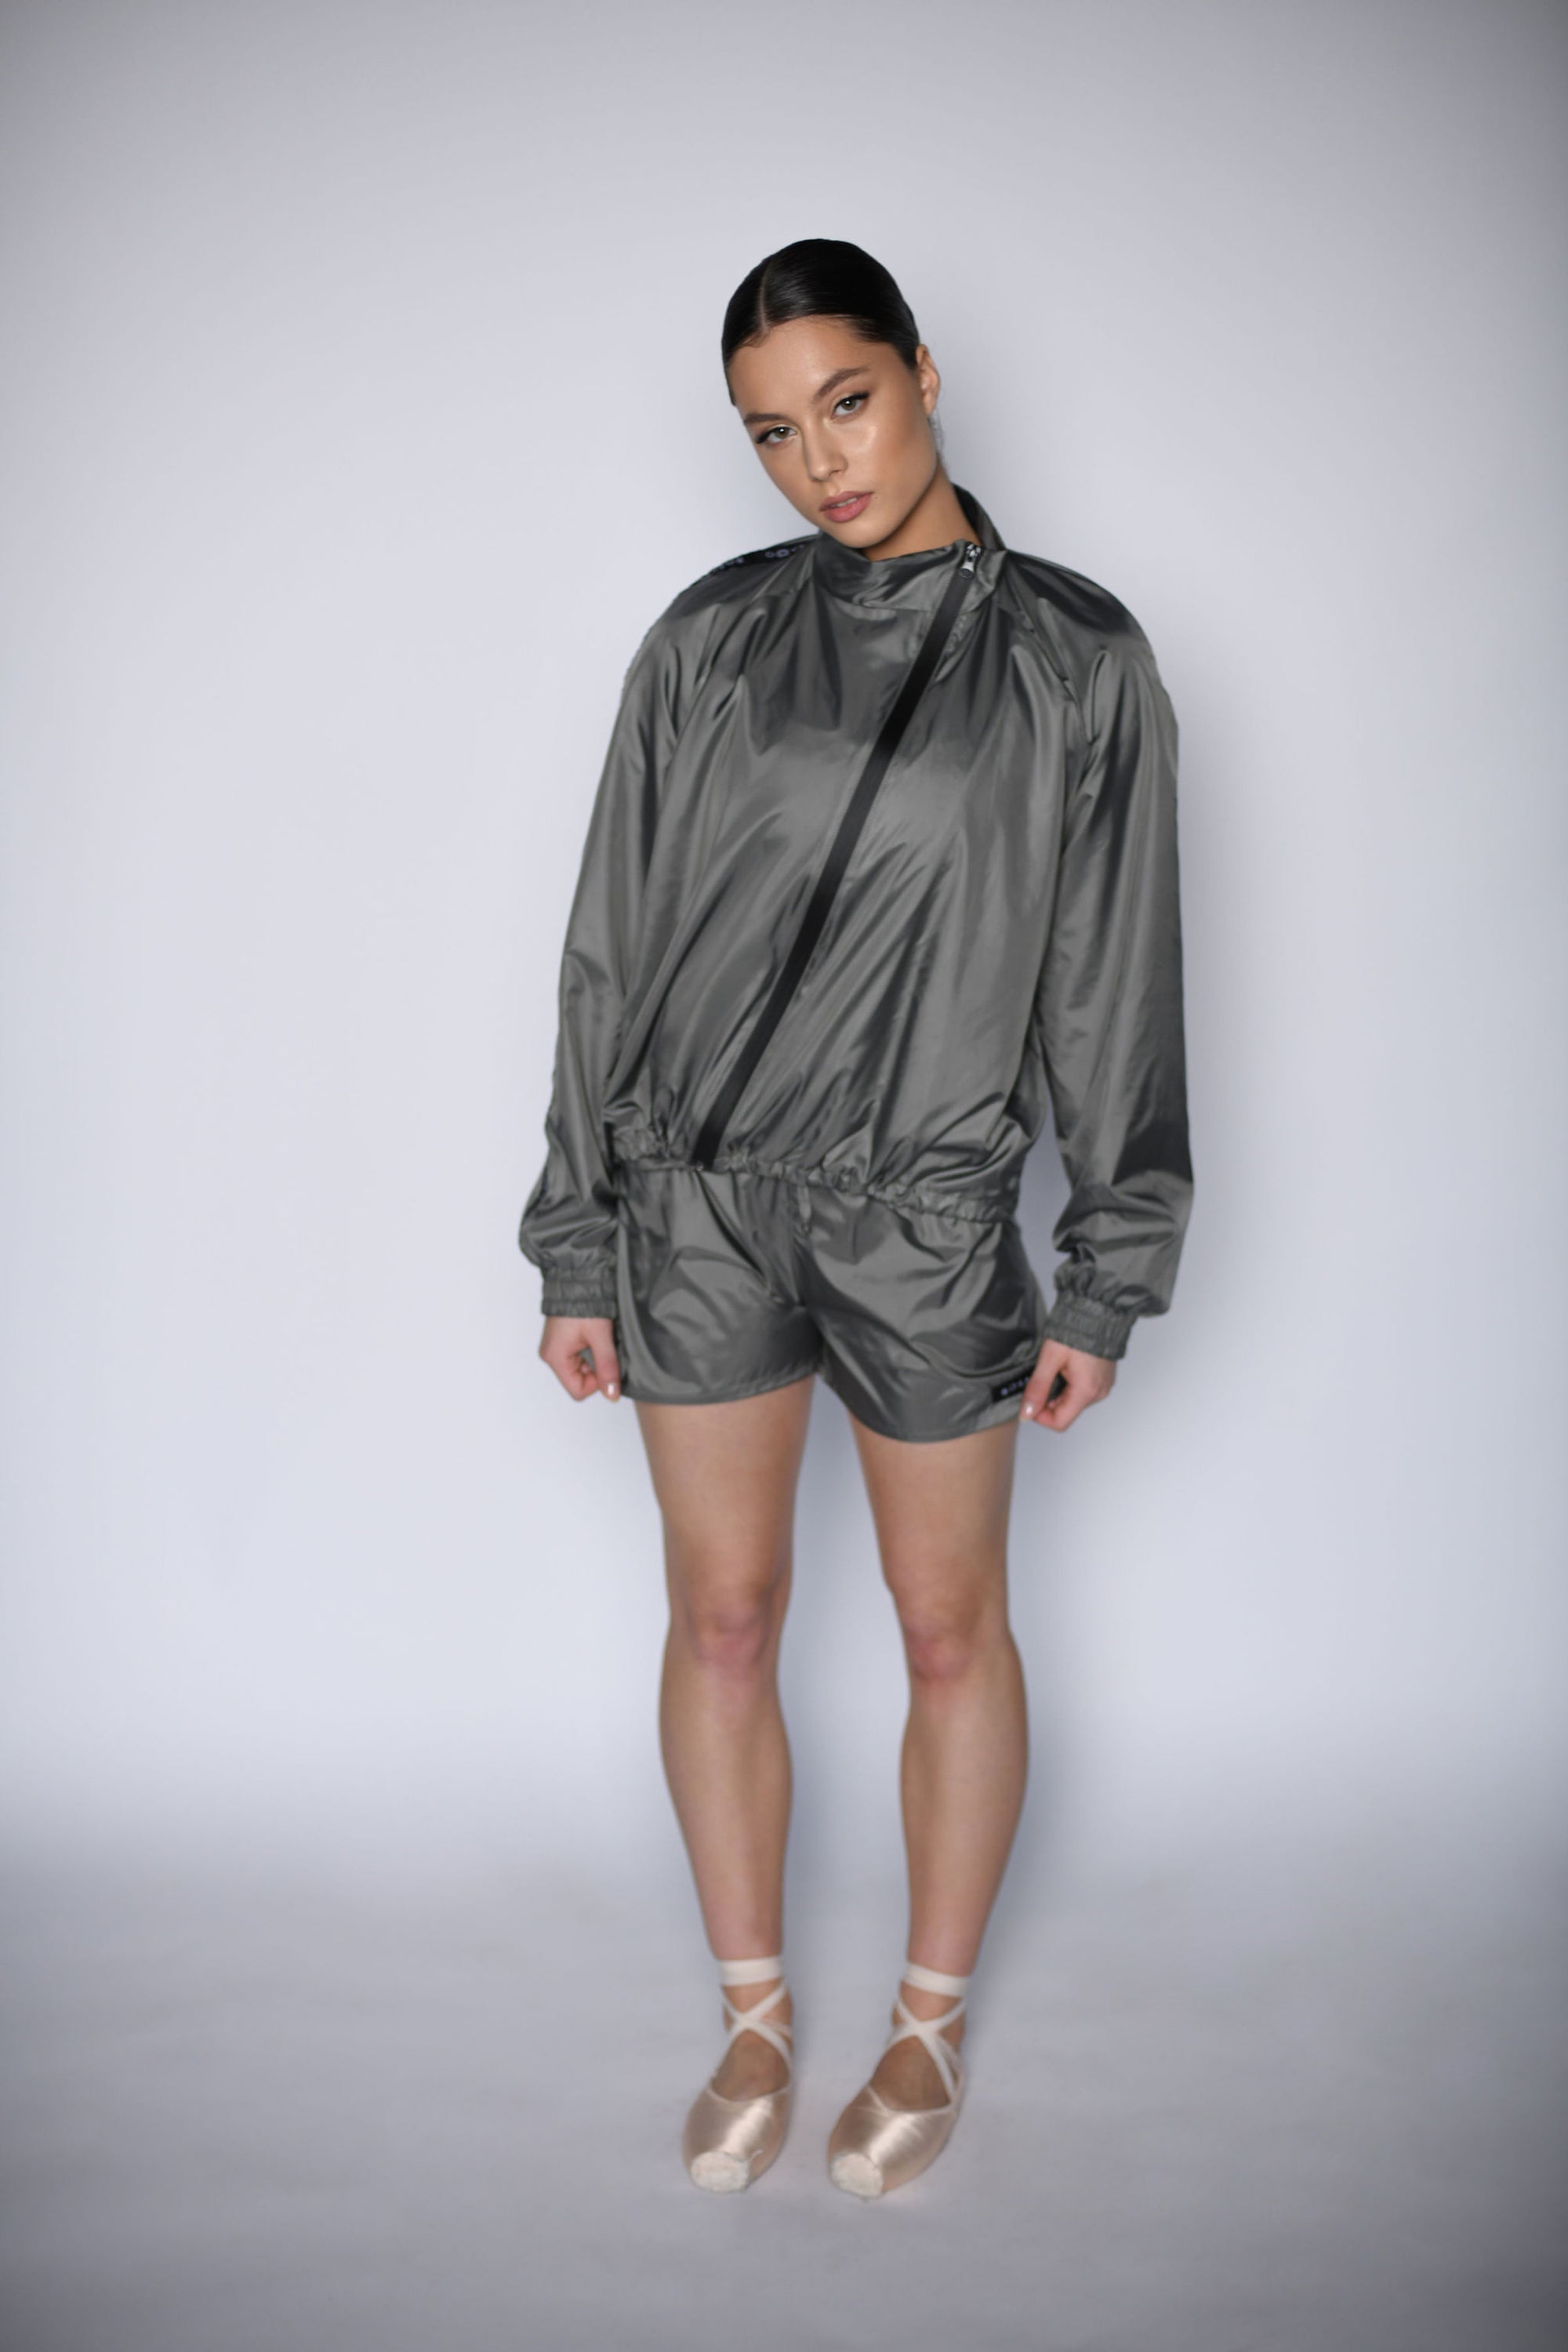 NEW URBAN SWAN COLLECTION S/S 23 | Dark concrete sports suit with shorts